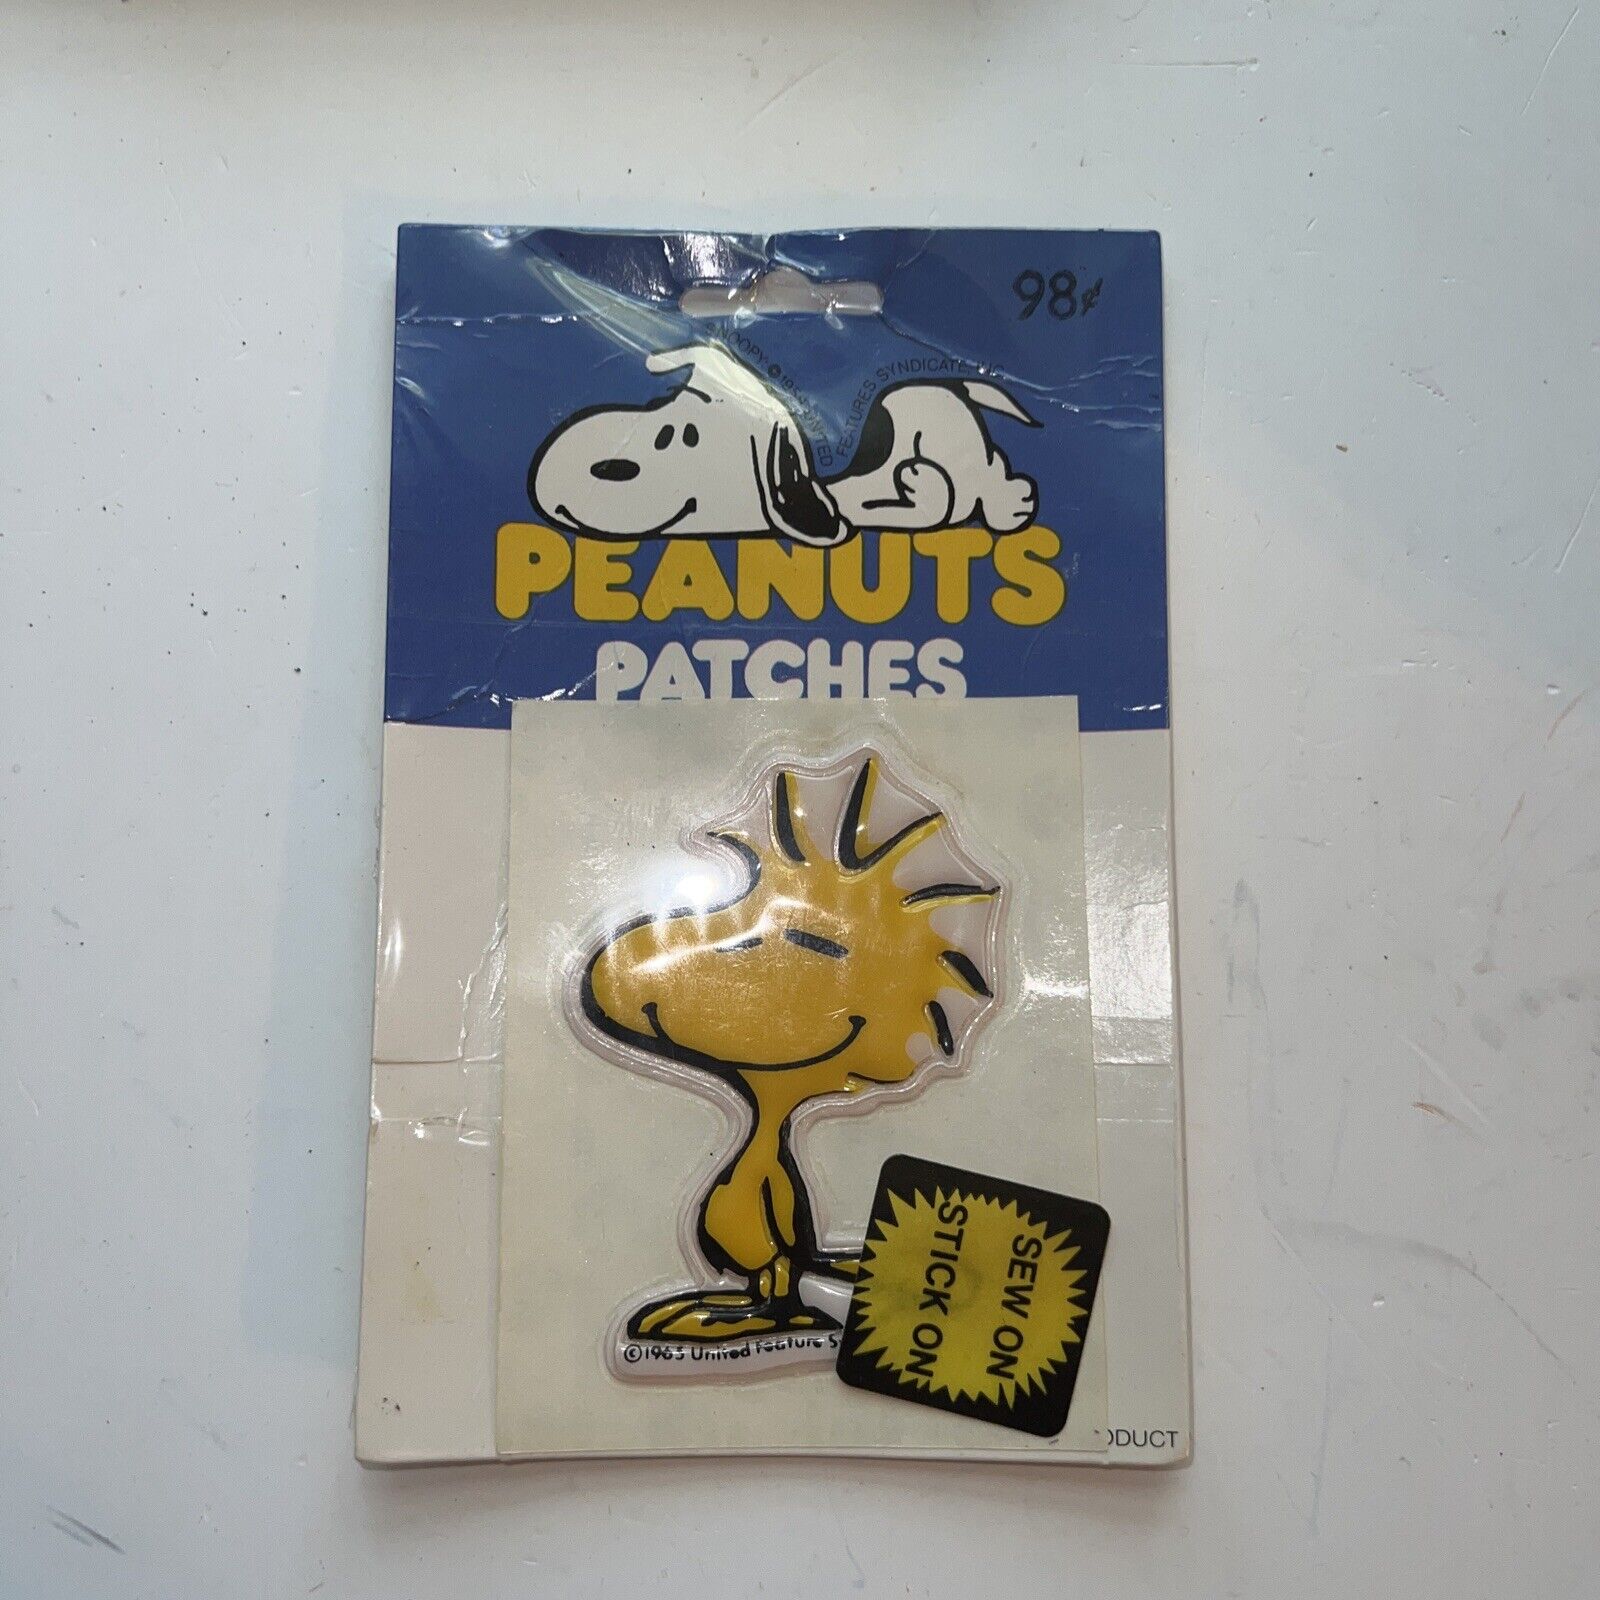 Woodstock Vintage 1965  Peanuts Snoopy Patch Vinyl united feature syndicate